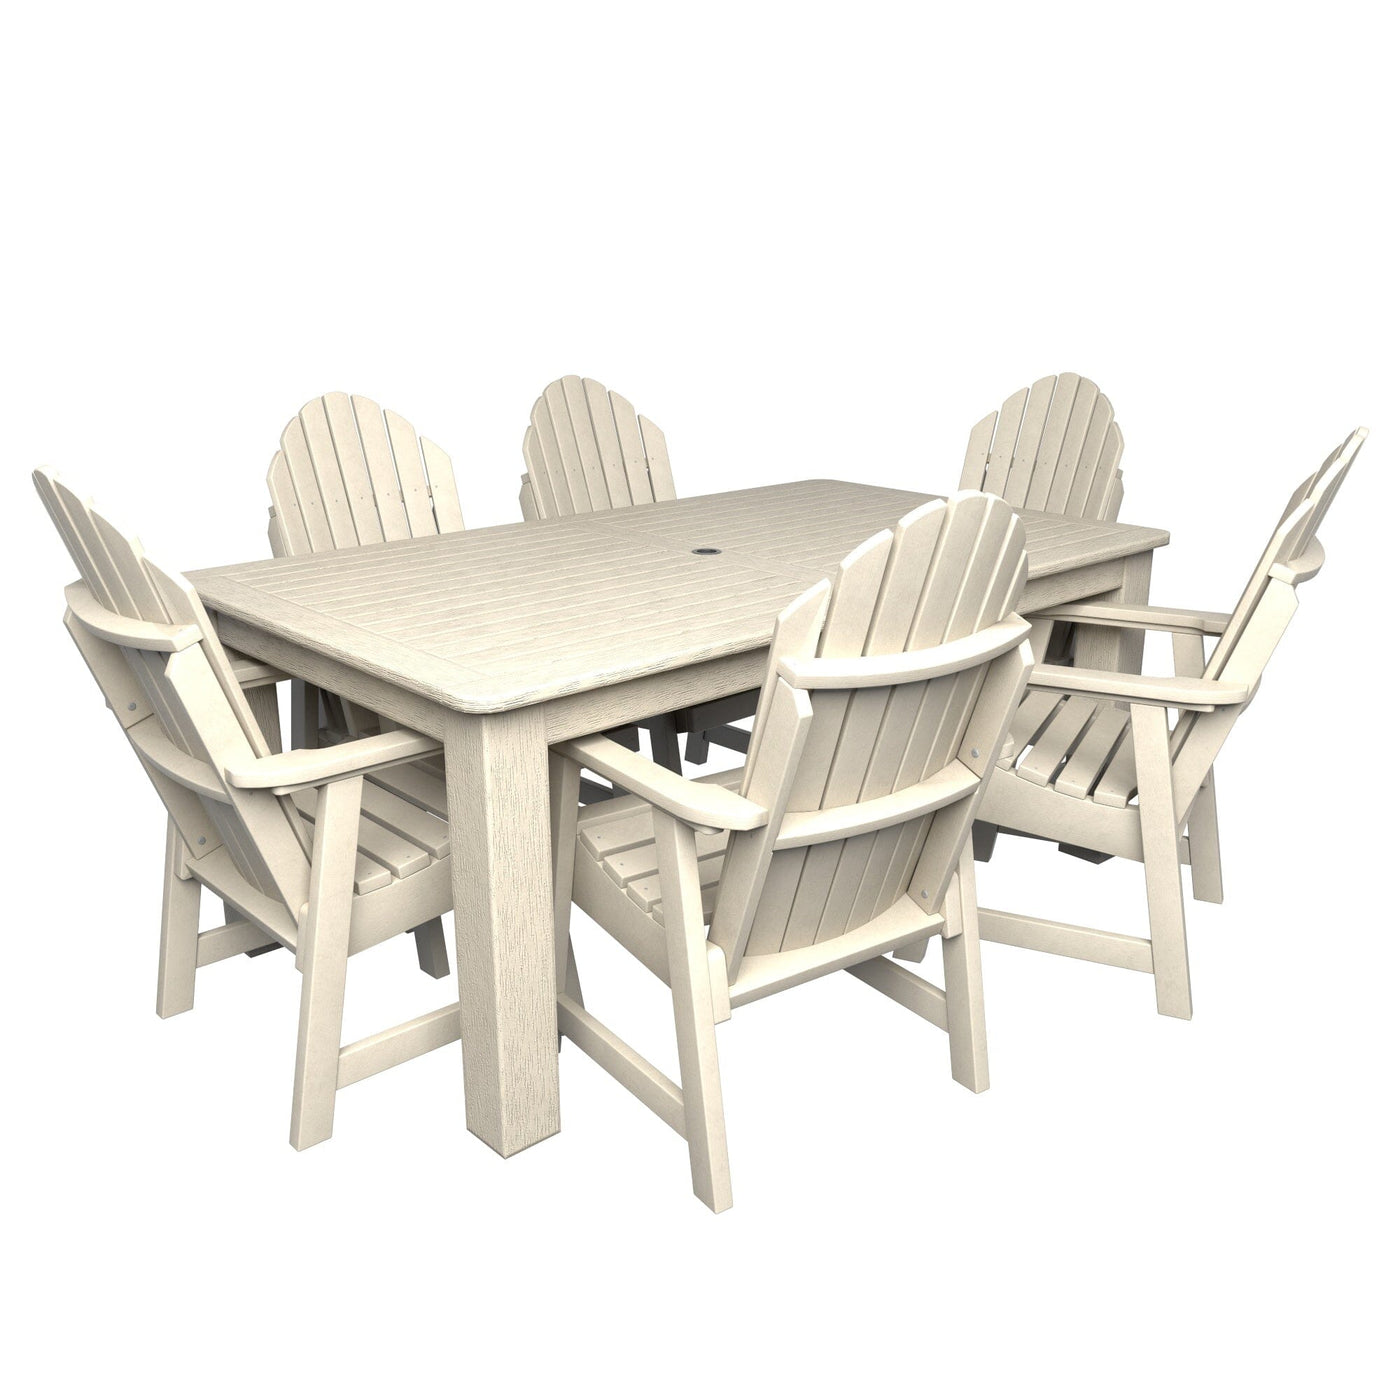 Hamilton 7pc Rectangular Outdoor Dining Set 42in x 72in - Dining Height Dining Highwood USA Whitewash 